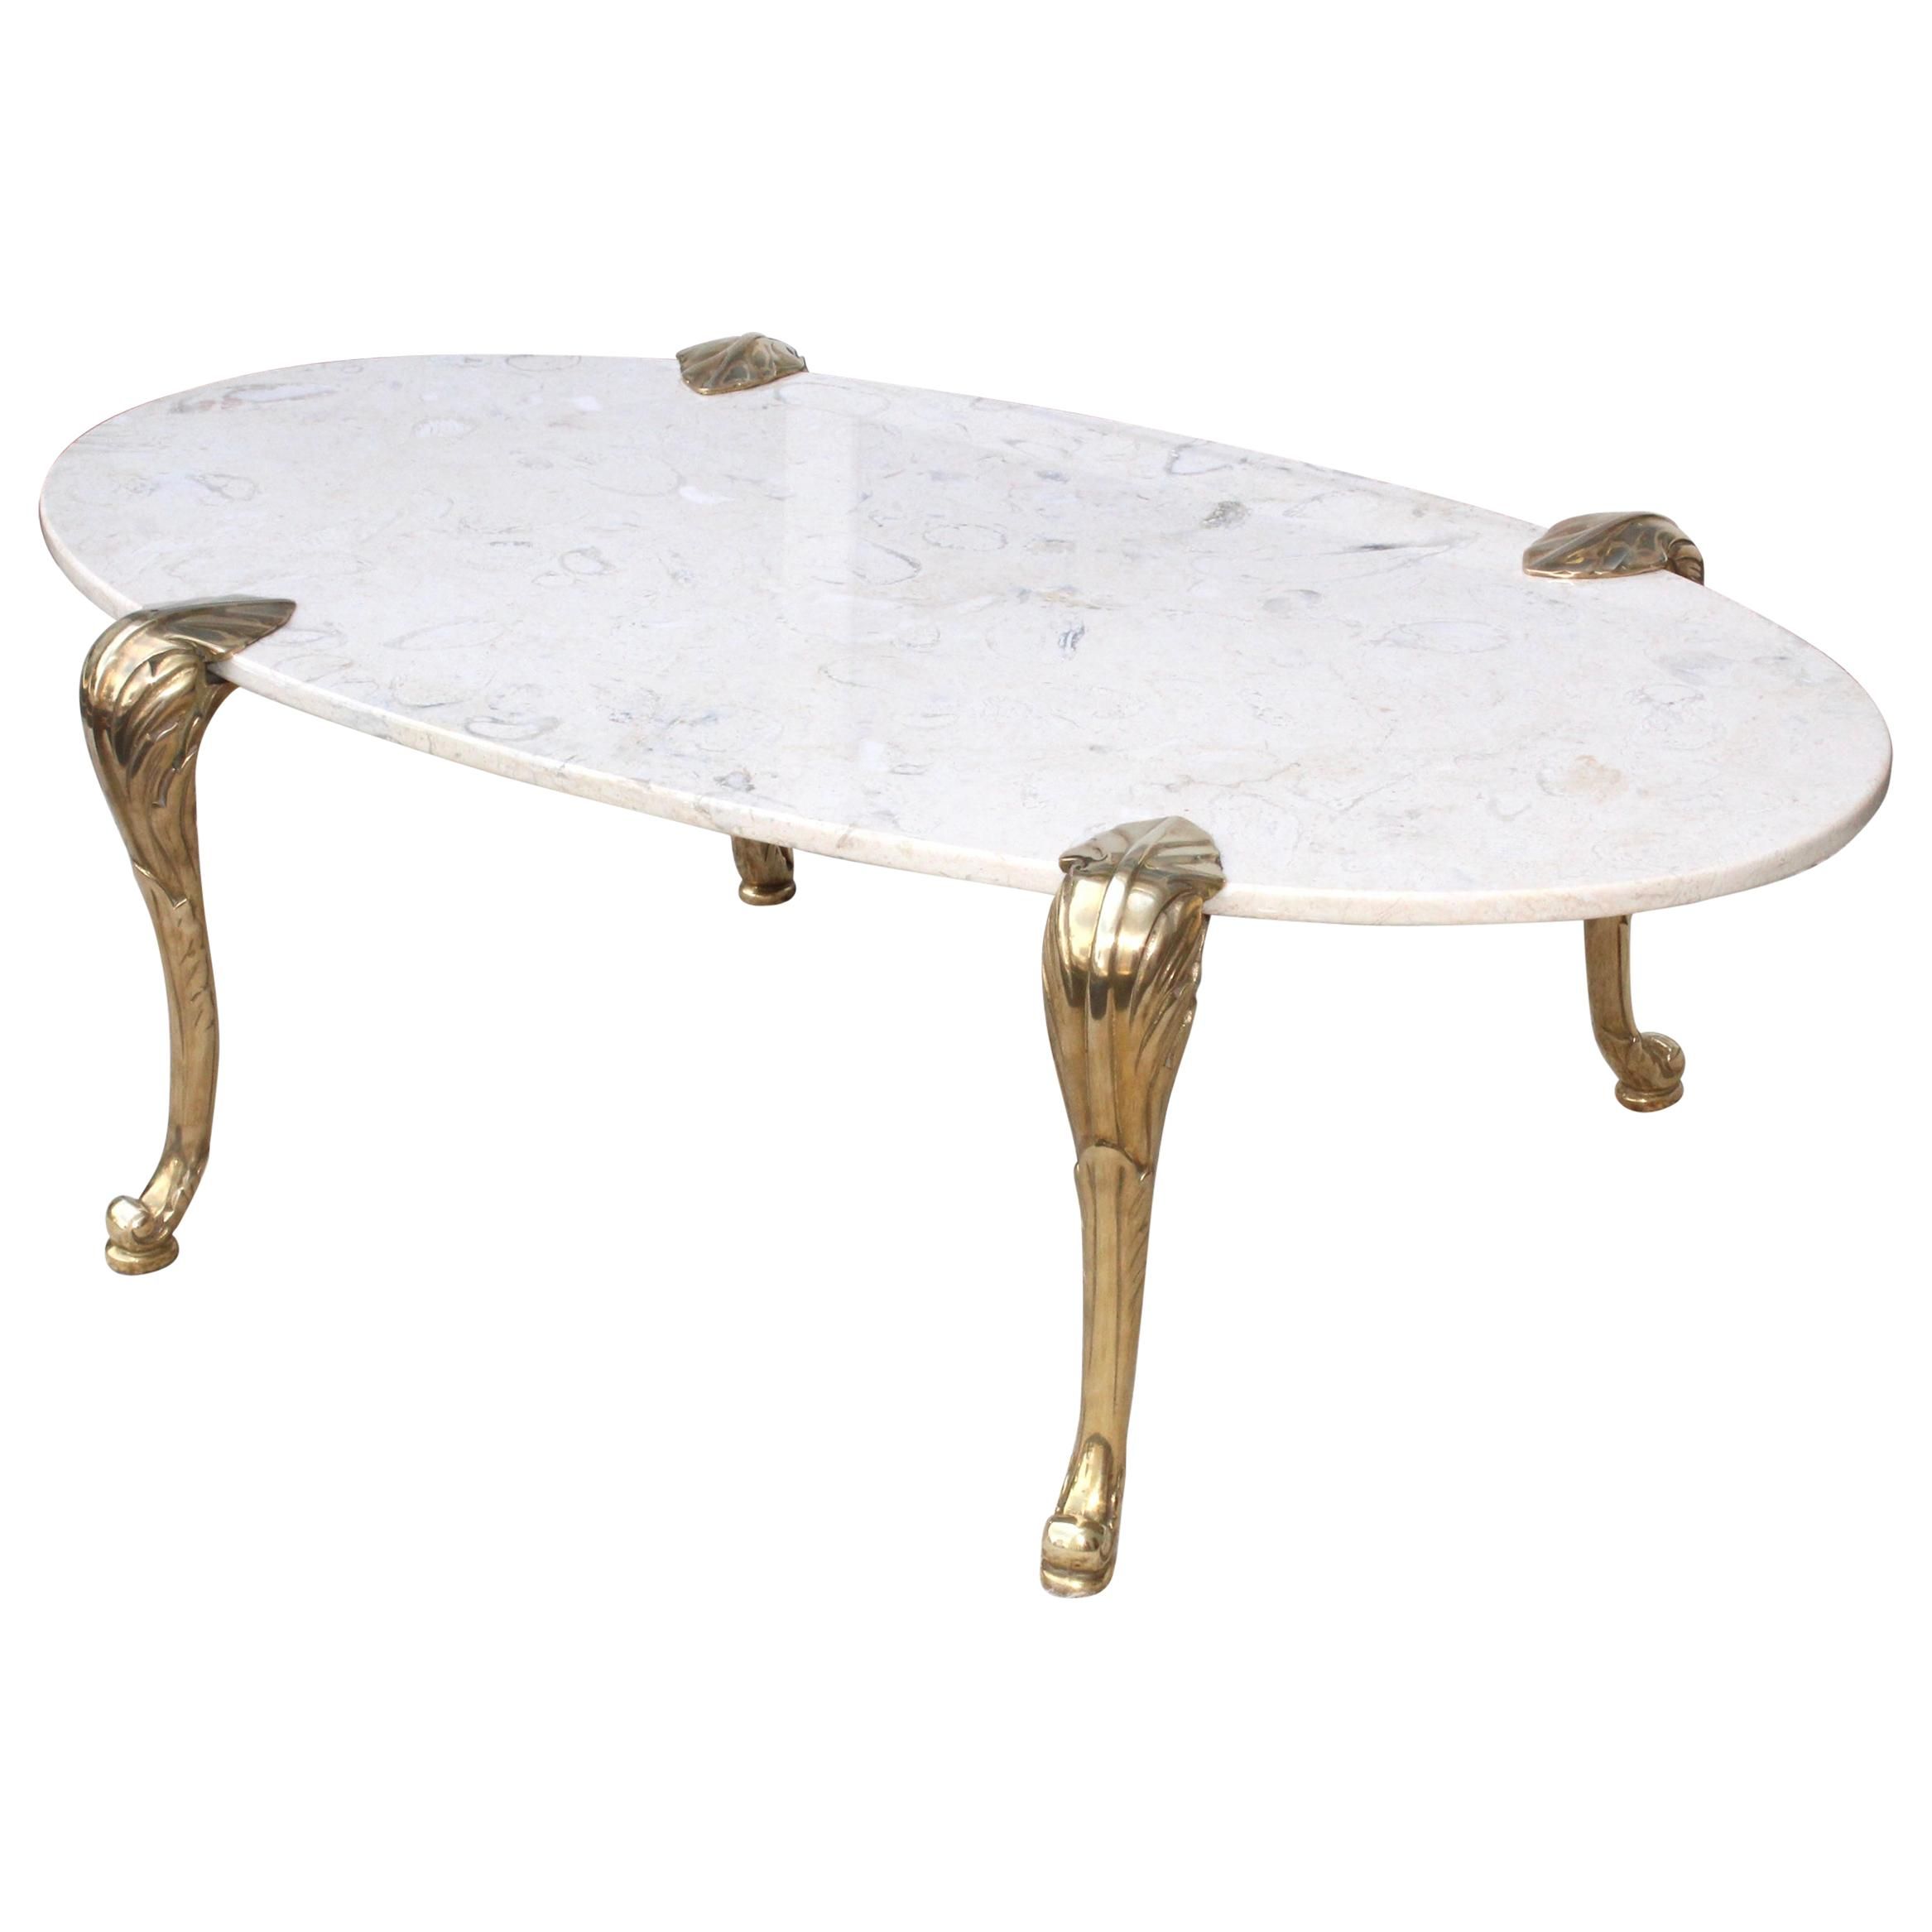 1970S Marble And Brass Coffee Table Attributed To Chapman Within Newest Chapman Marble Oval Dining Tables (View 10 of 25)